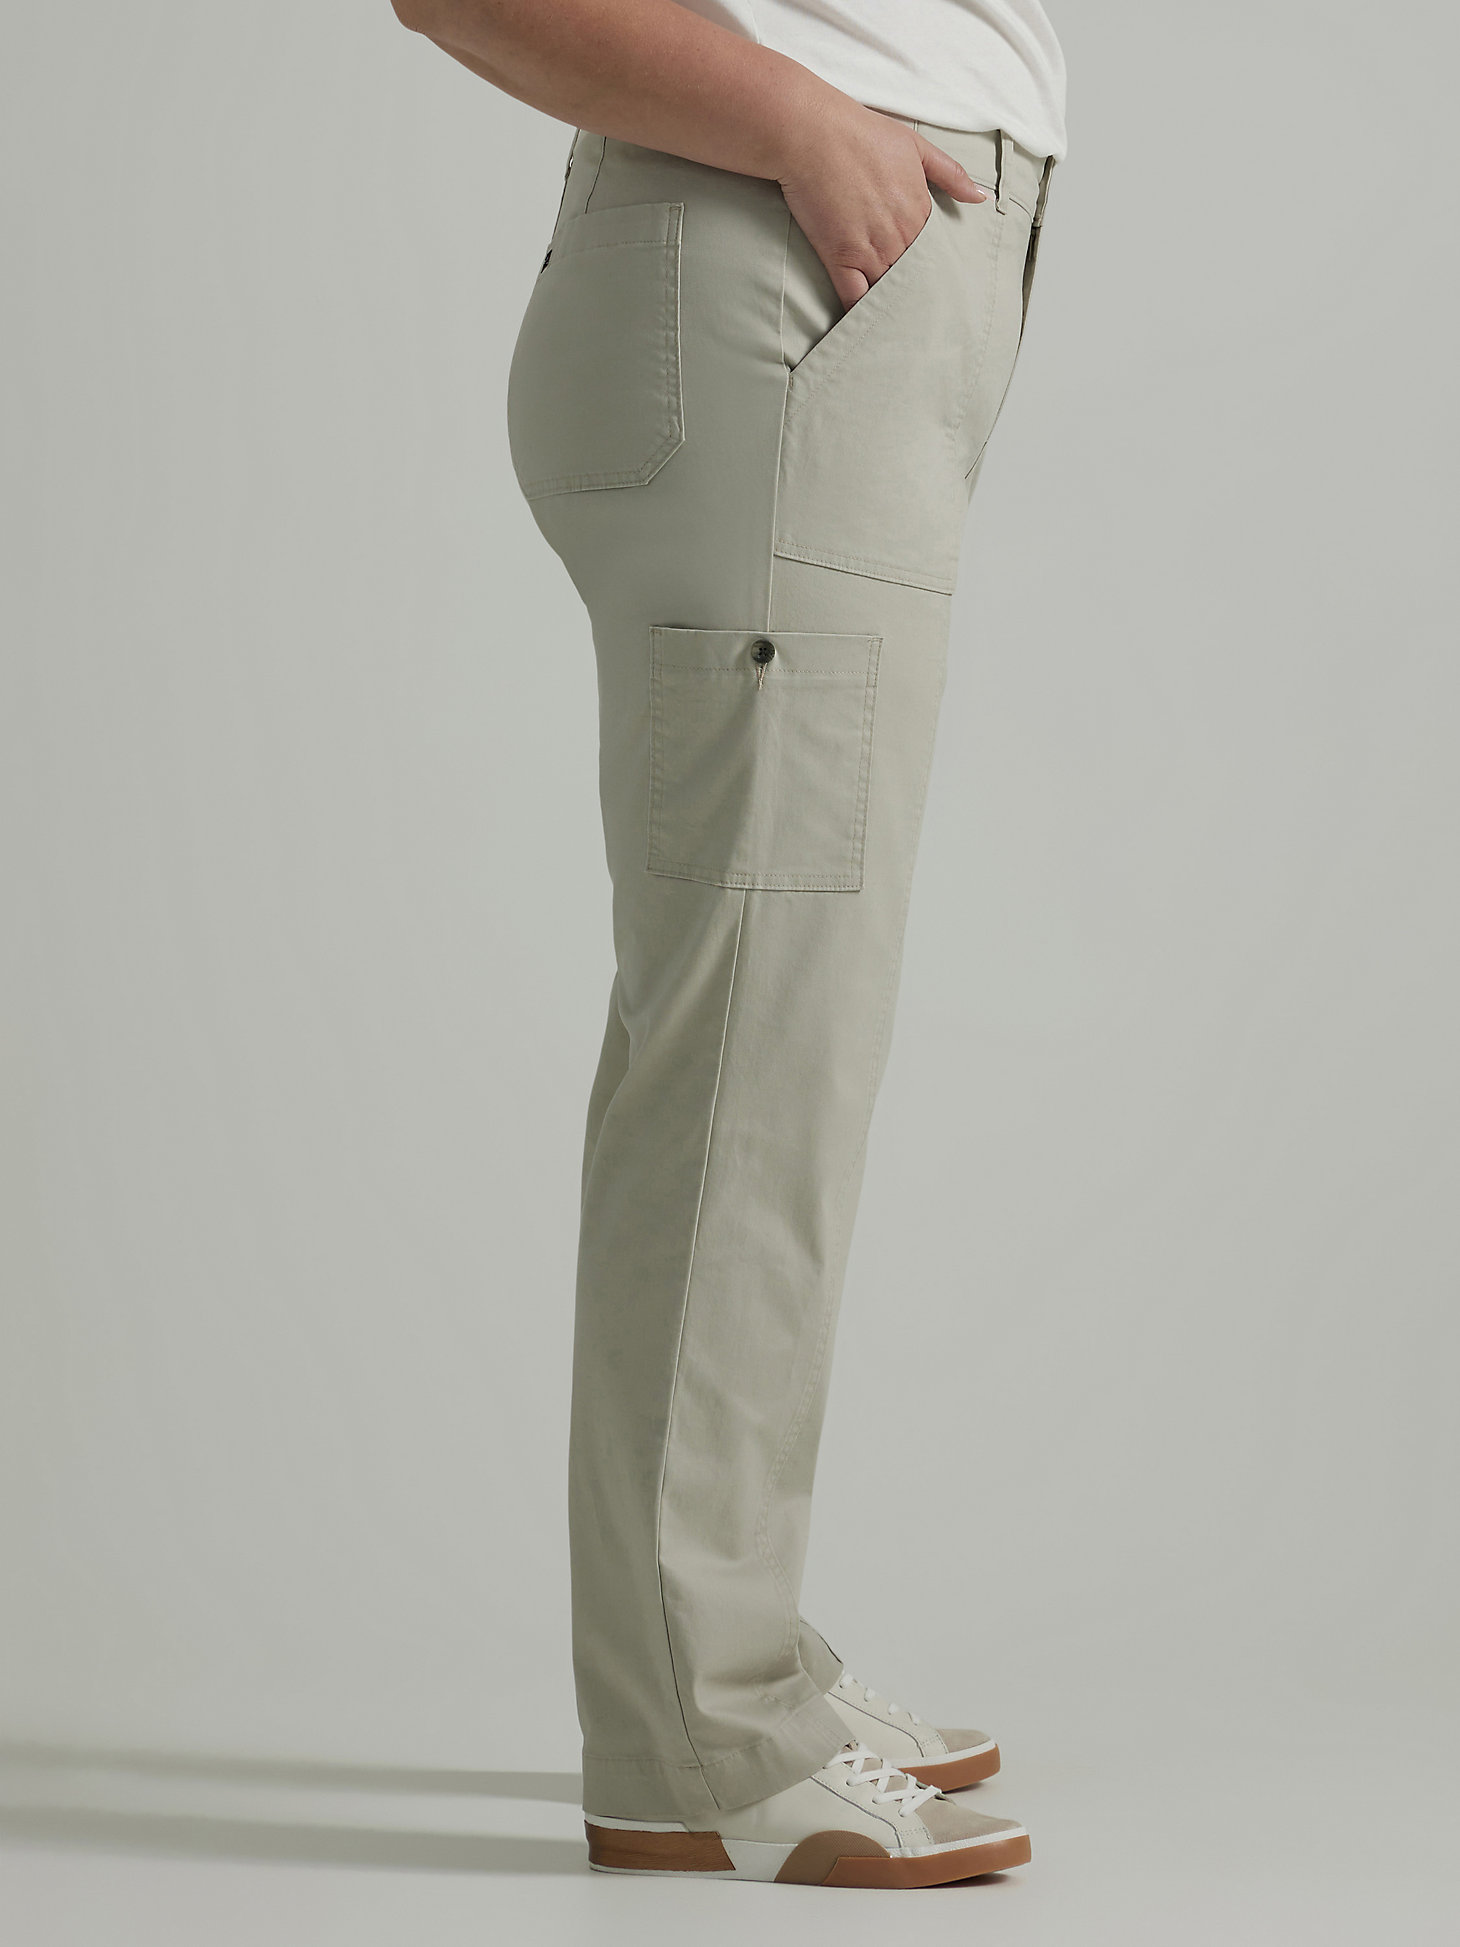 Women's Ultra Lux Comfort with Flex-to-Go Loose Utility Pant (Plus) in Salina Stone alternative view 3